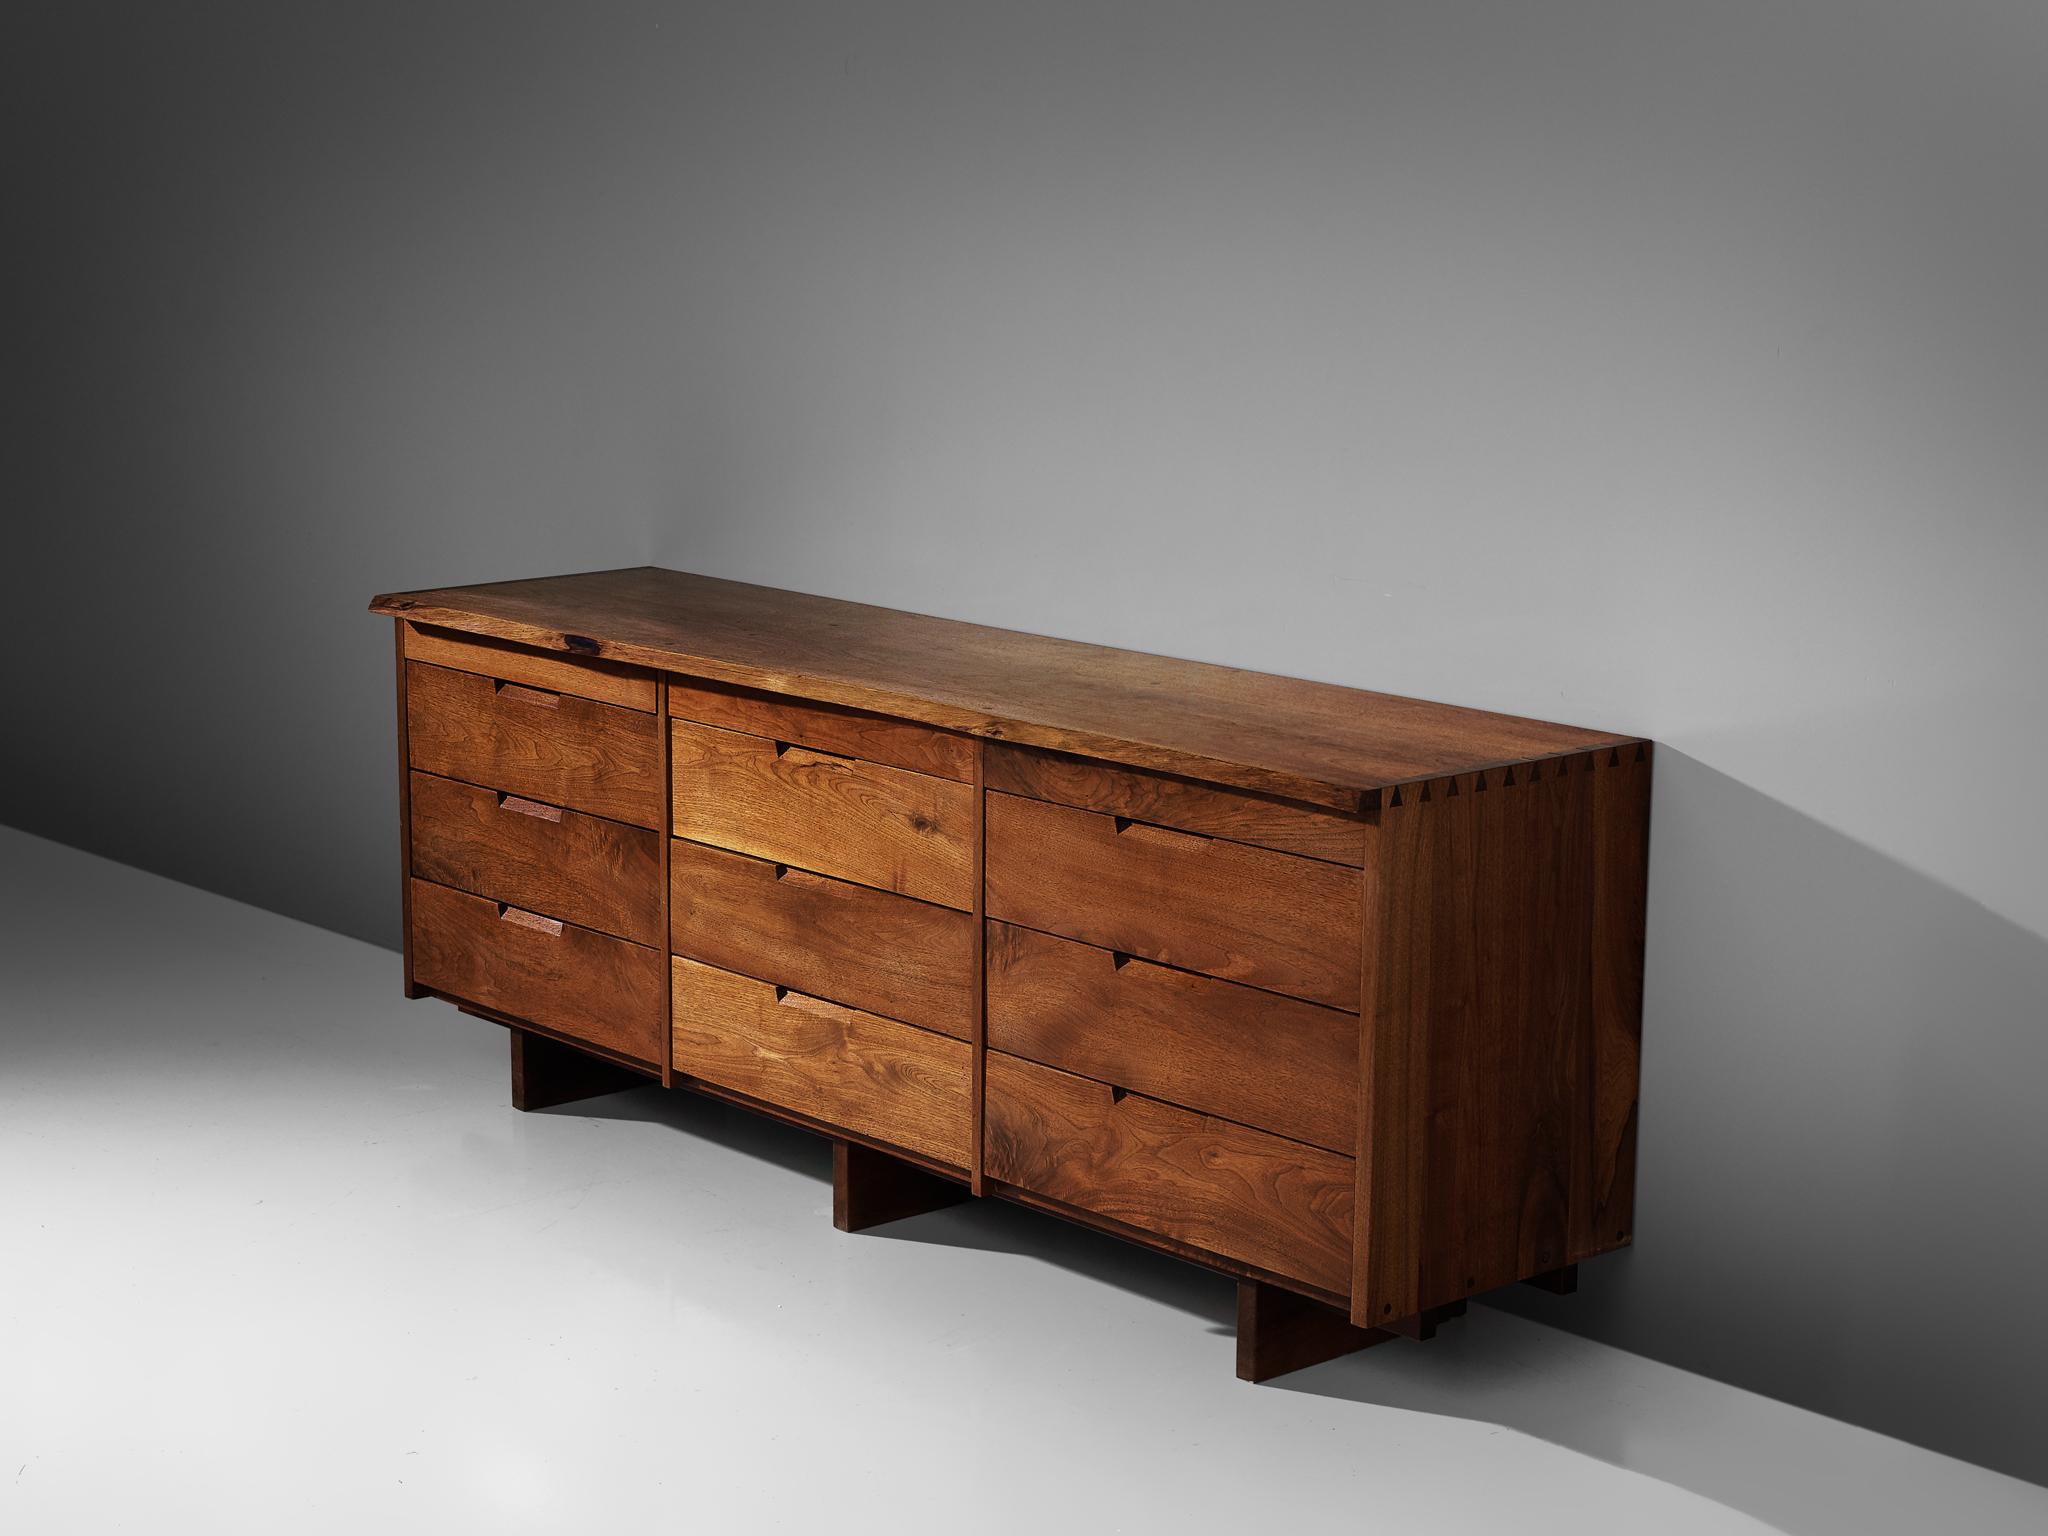 George Nakashima, cabinet in walnut, New Hope, PA, 1960s-1970s.

This cabinet features nine drawers, executed in walnut with traditional and finished with archetypical dovetail Nakashima wood-joints. The large dresser rests on three slabs of solid